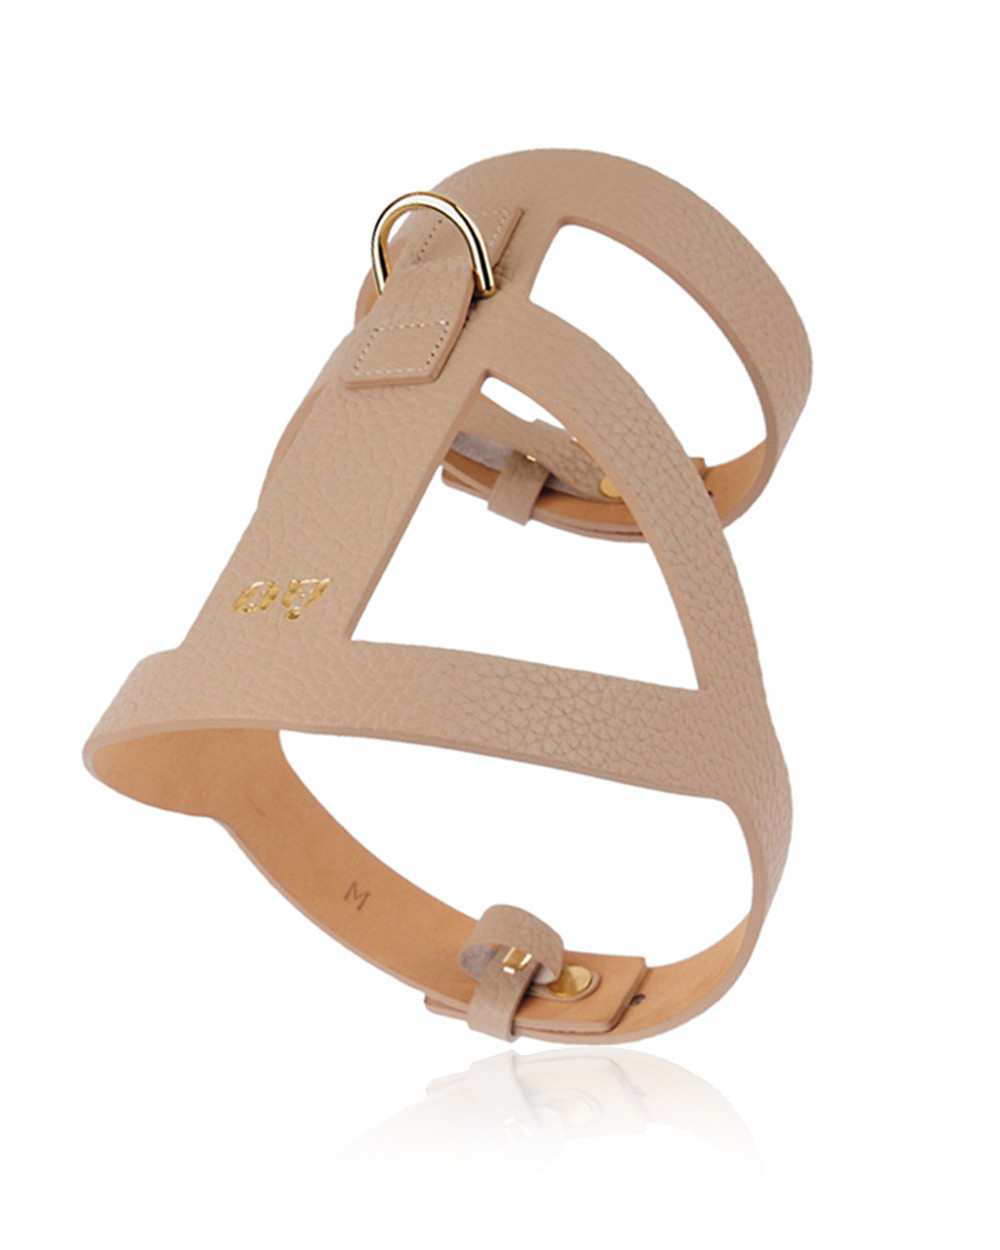 Comfortable dog harness in two colors.